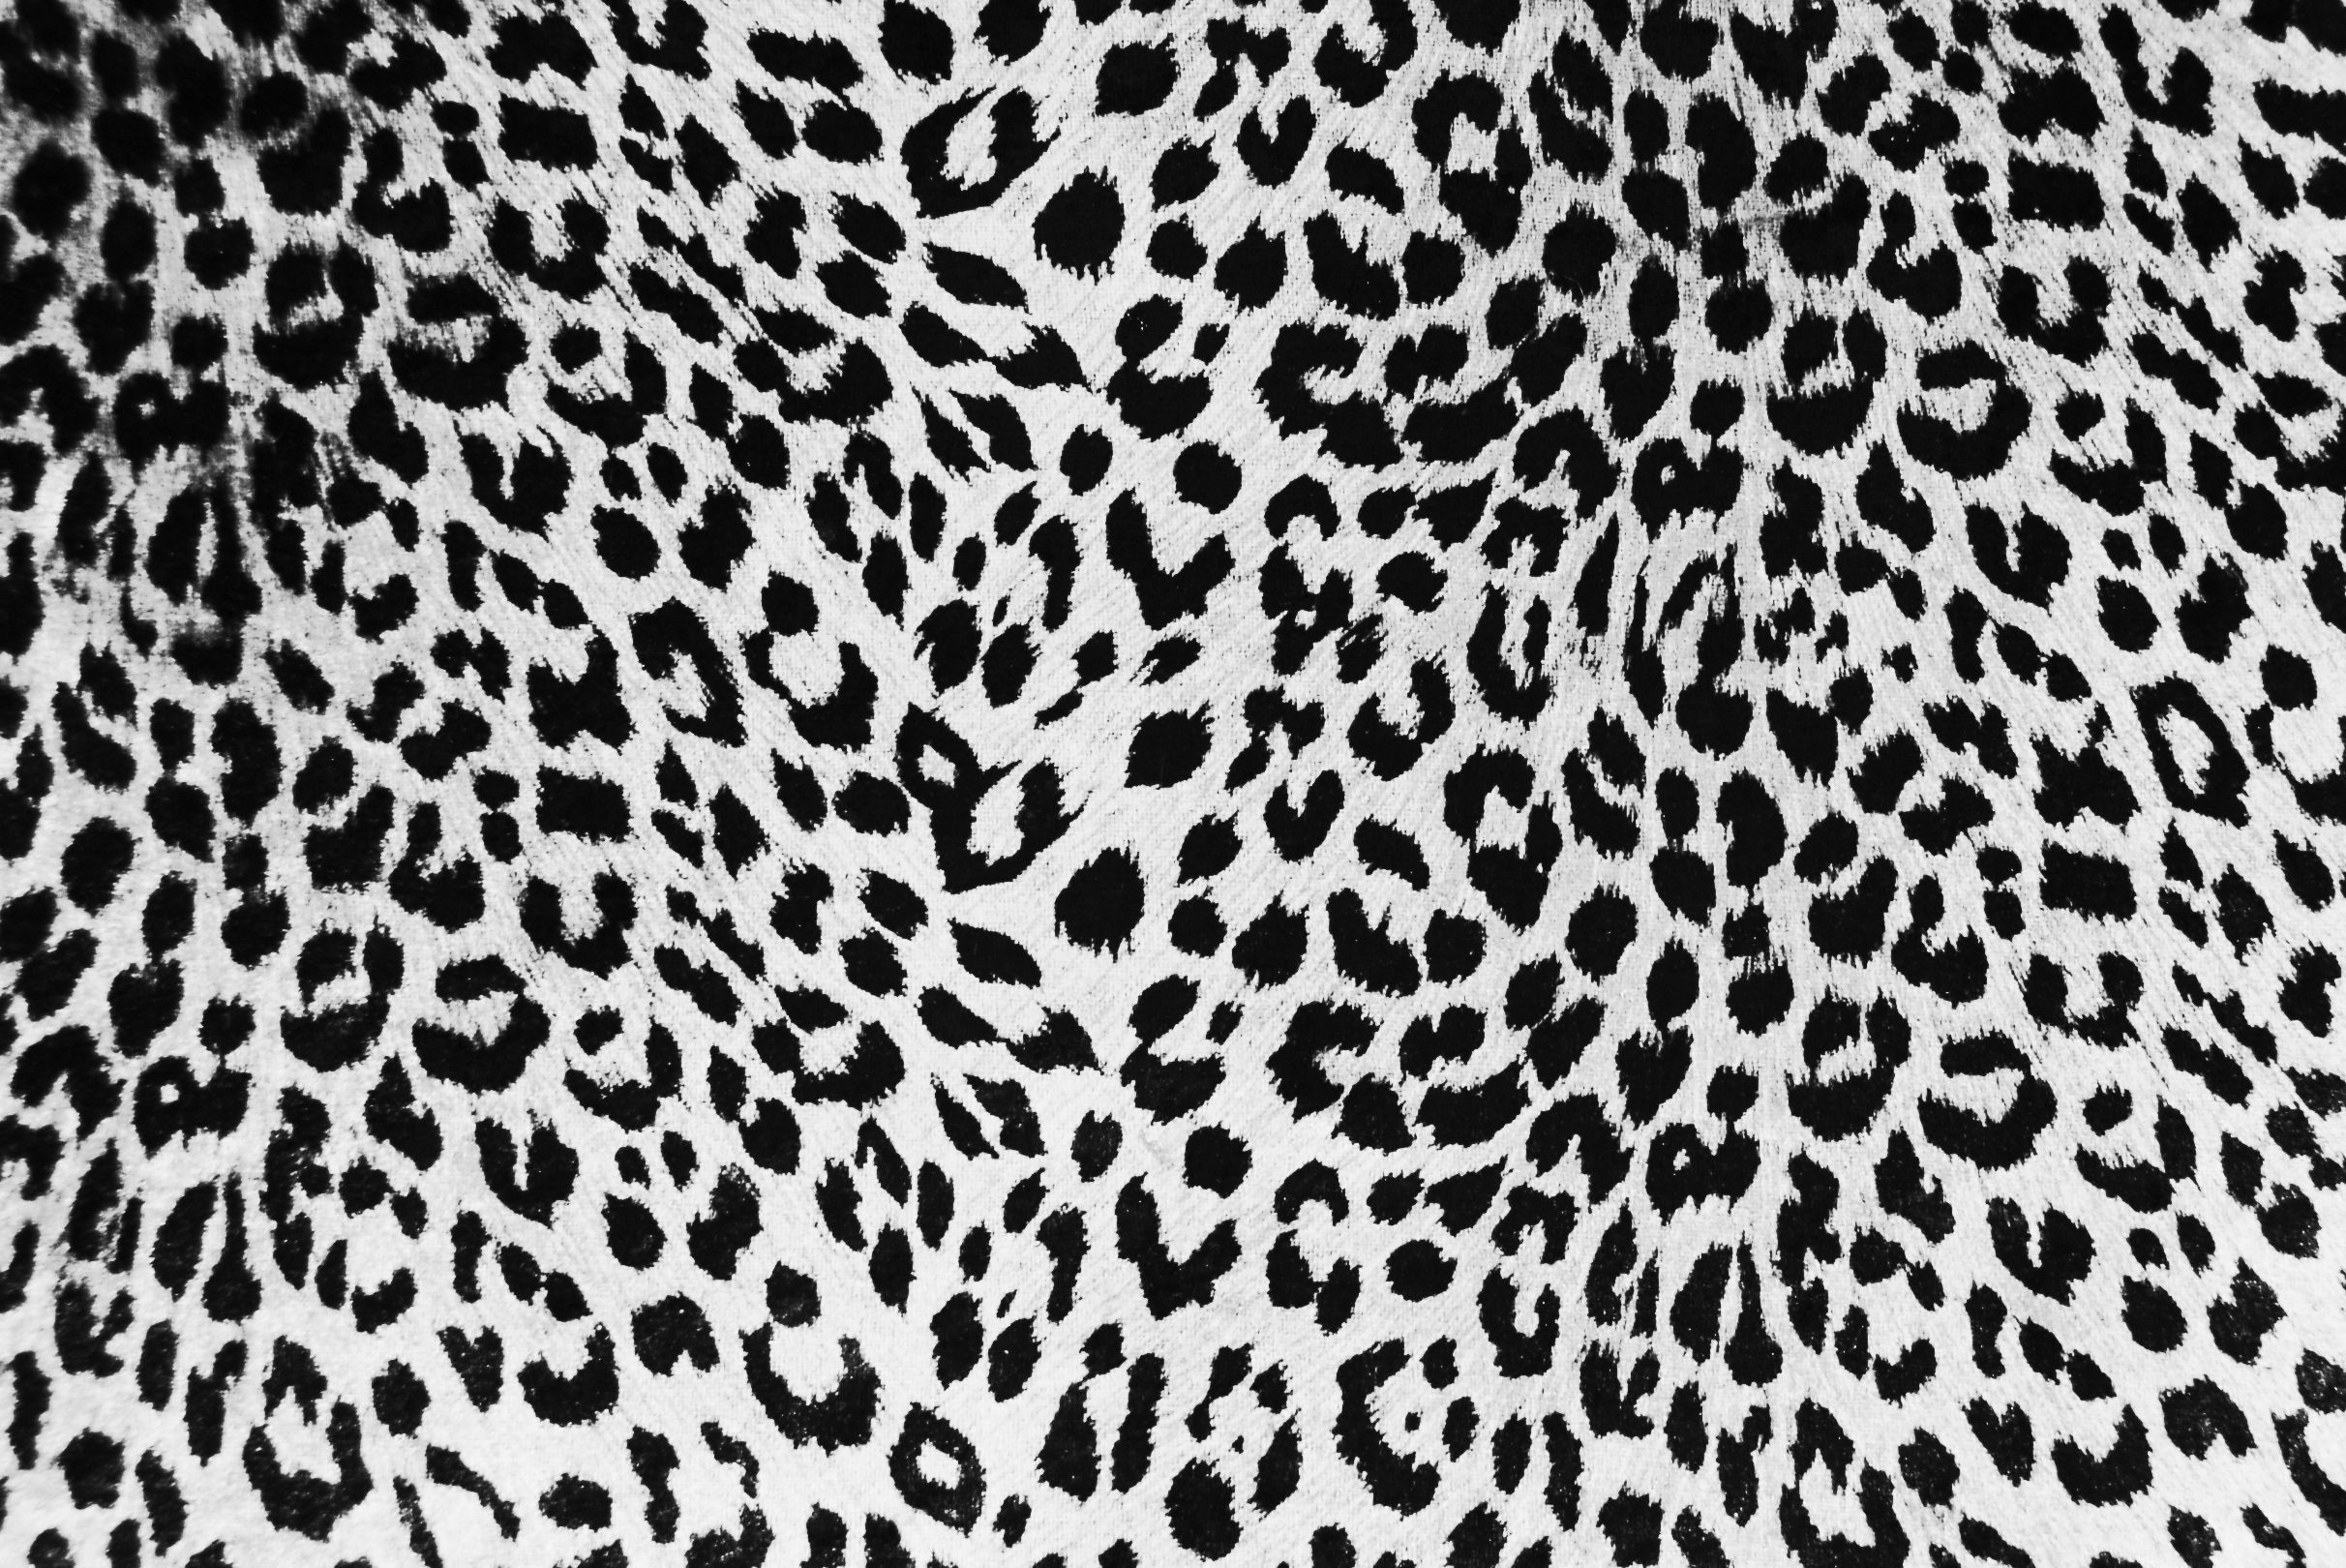 Free textures and background patterns Black and white leopard skin. Cheetah print wallpaper, Cheetah print background, Print